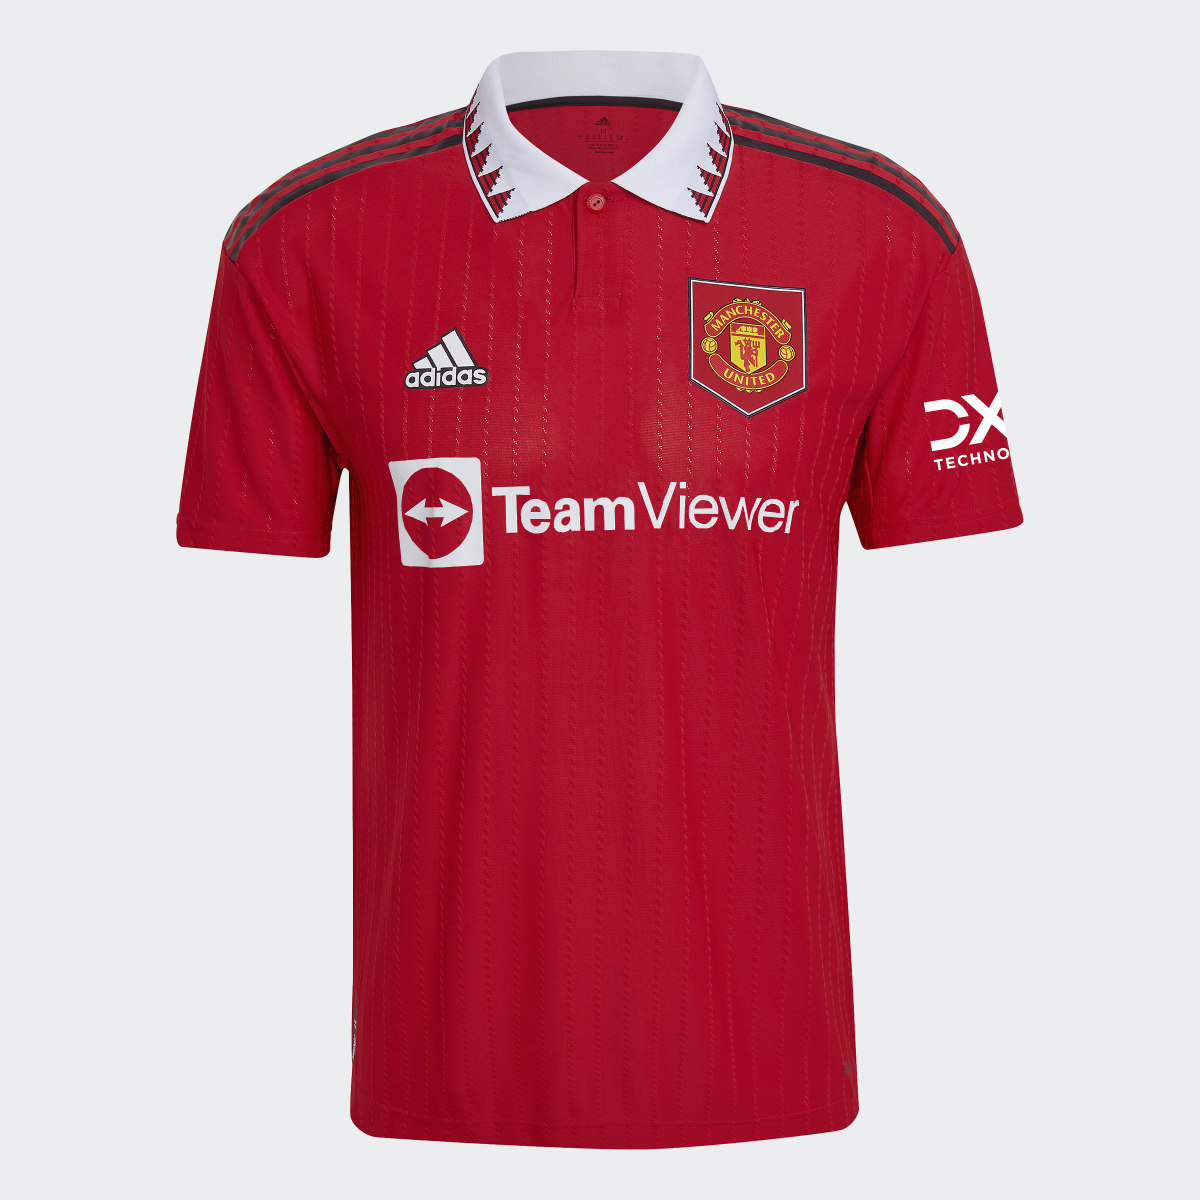 Adidas Maillot Domicile Manchester United 22/23. 5